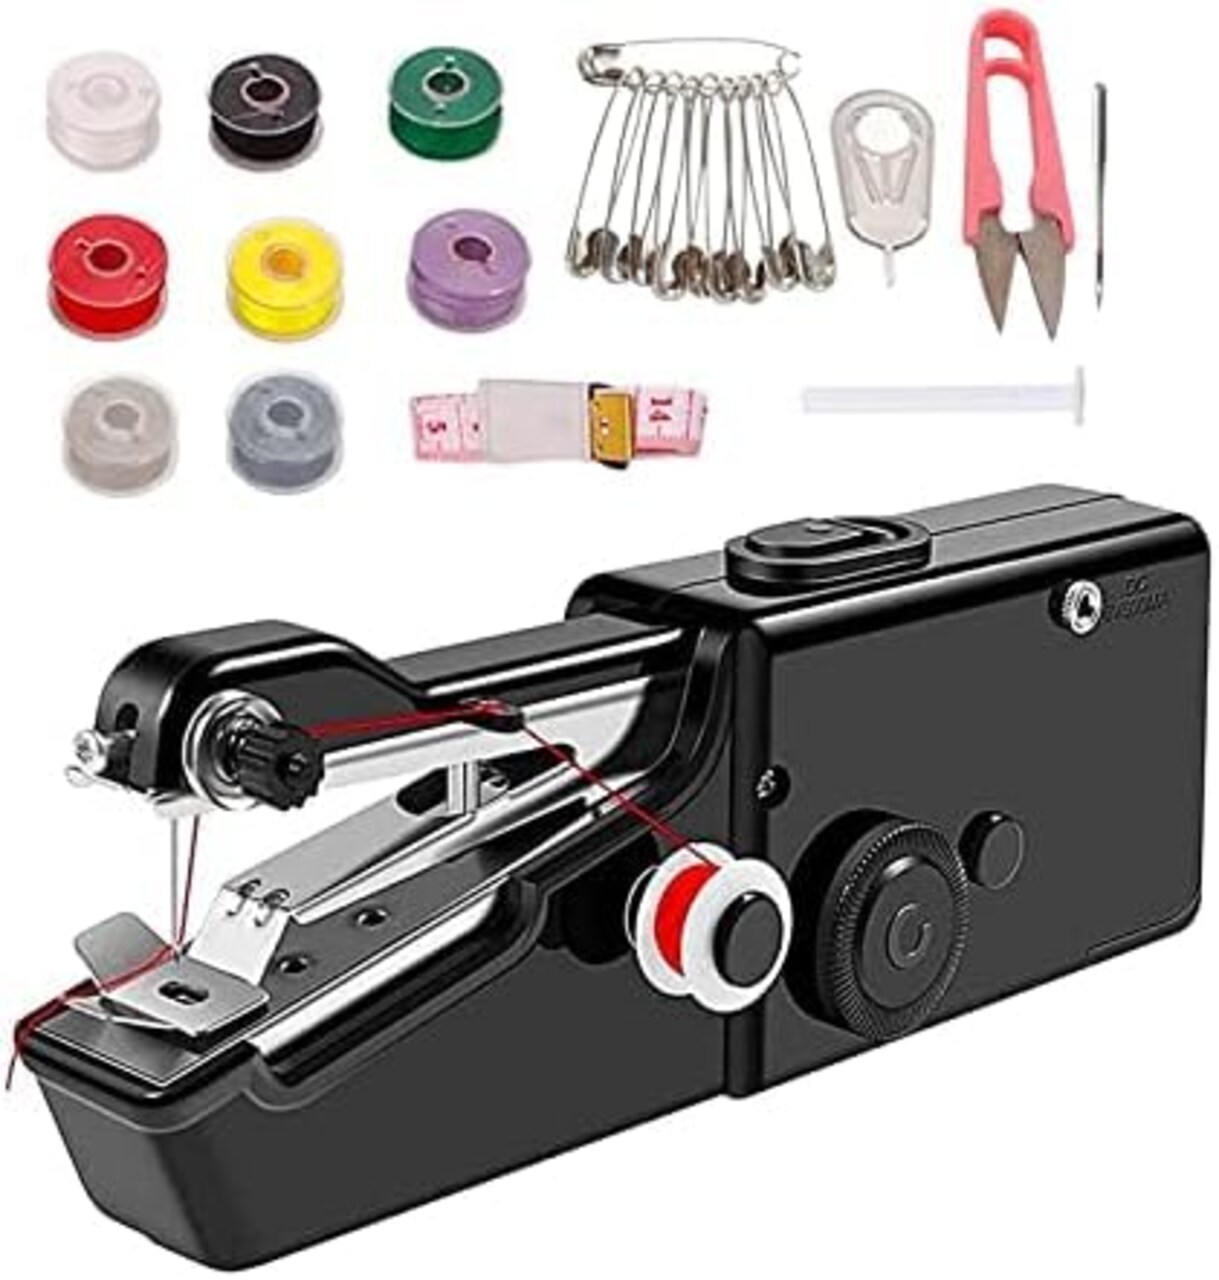 Handheld Sewing Machine, GUSSLM Mini Handheld Sewing Machine for Quick  Stitching, Portable Sewing Machine Suitable for Home,Travel and DIY, Tool  Kit for Clothing Repair and Sewing Crafts(Black)